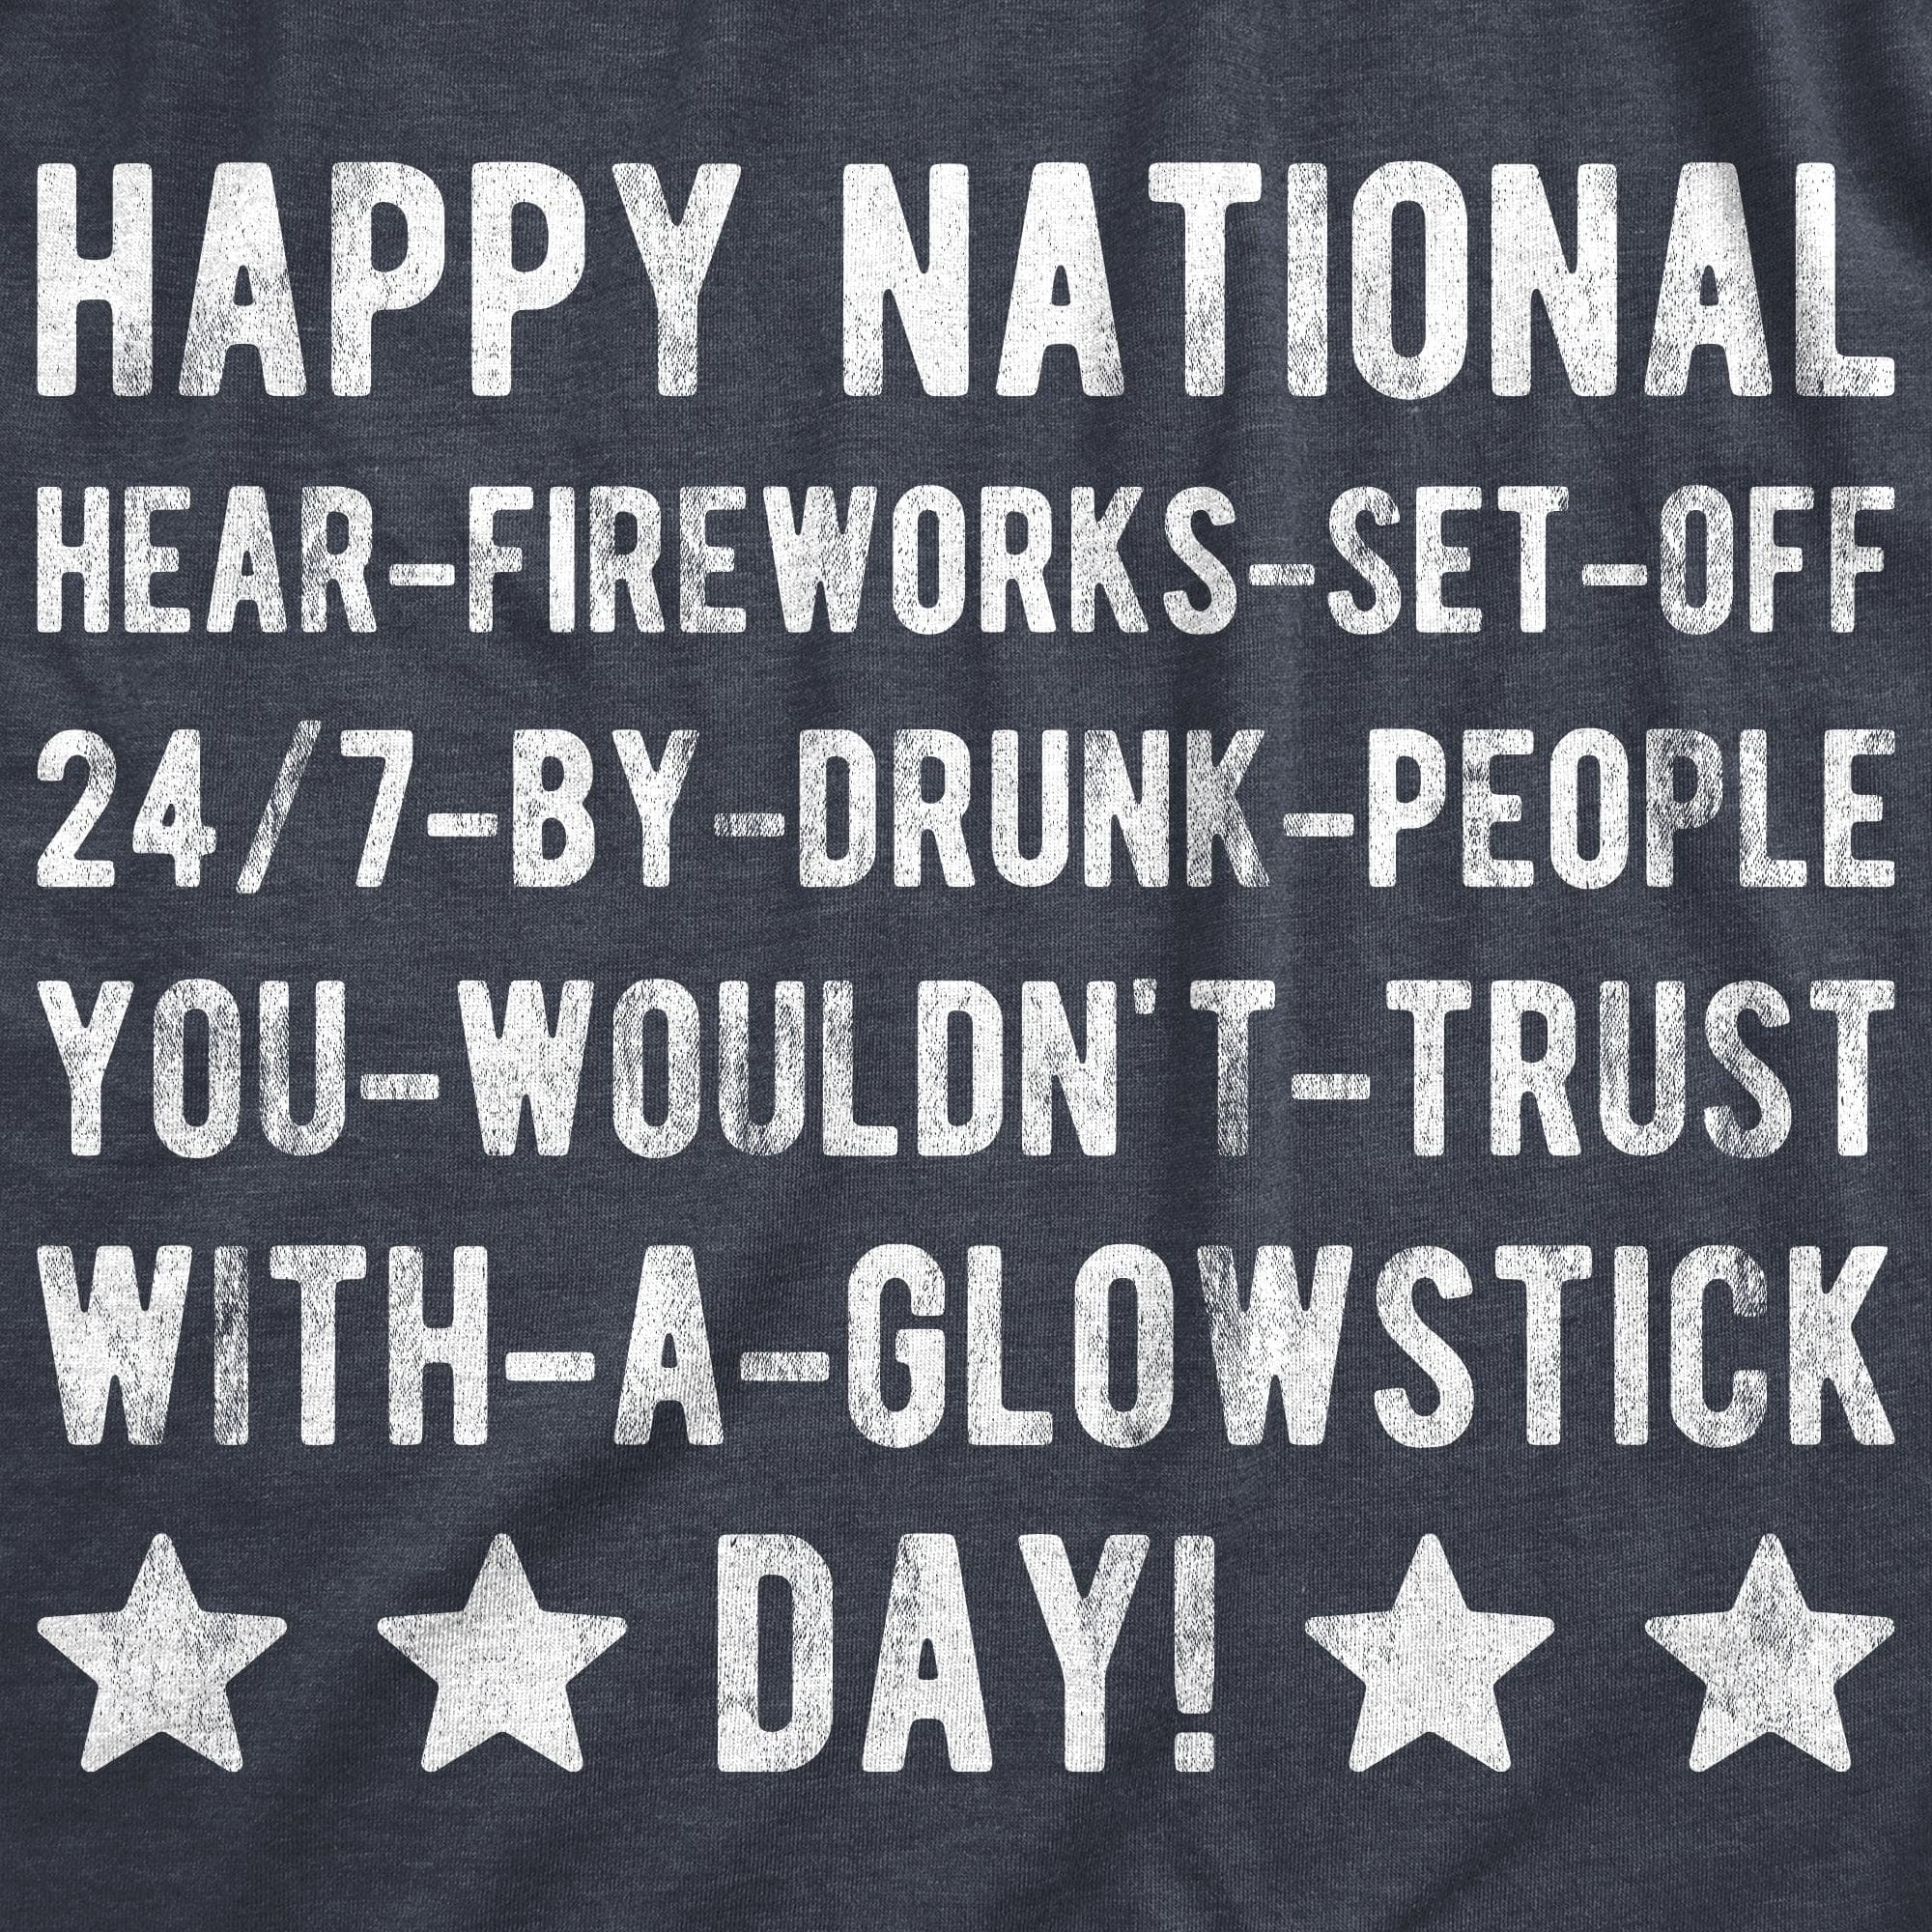 Happy National Fireworks Set Off By Drunk People Day Women's Tshirt  -  Crazy Dog T-Shirts